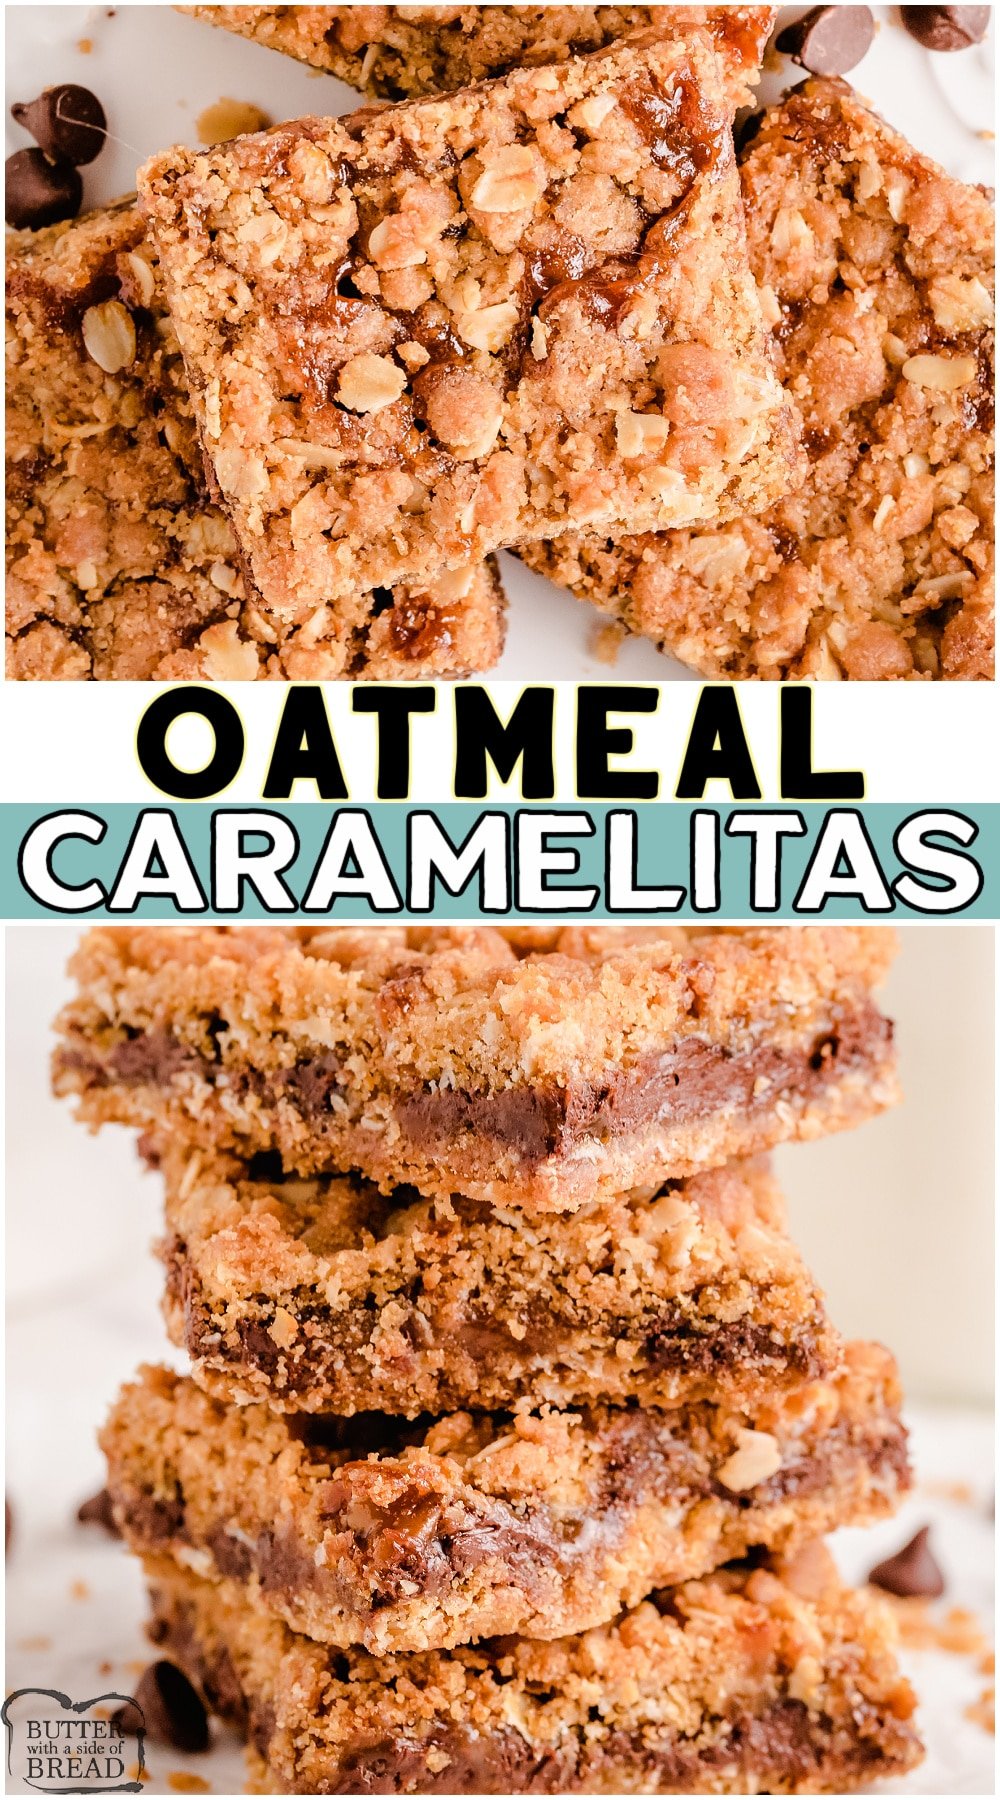 Oatmeal Caramelitas are an incredible oatmeal chocolate dessert bar with caramel! Layers of oats, brown sugar, butter and chocolate chips with a delightful layer of gooey caramel baked inside. #caramel #oatmeal #barrecipe #caramelitas #easyrecipe from BUTTER WITH A SIDE OF BREAD